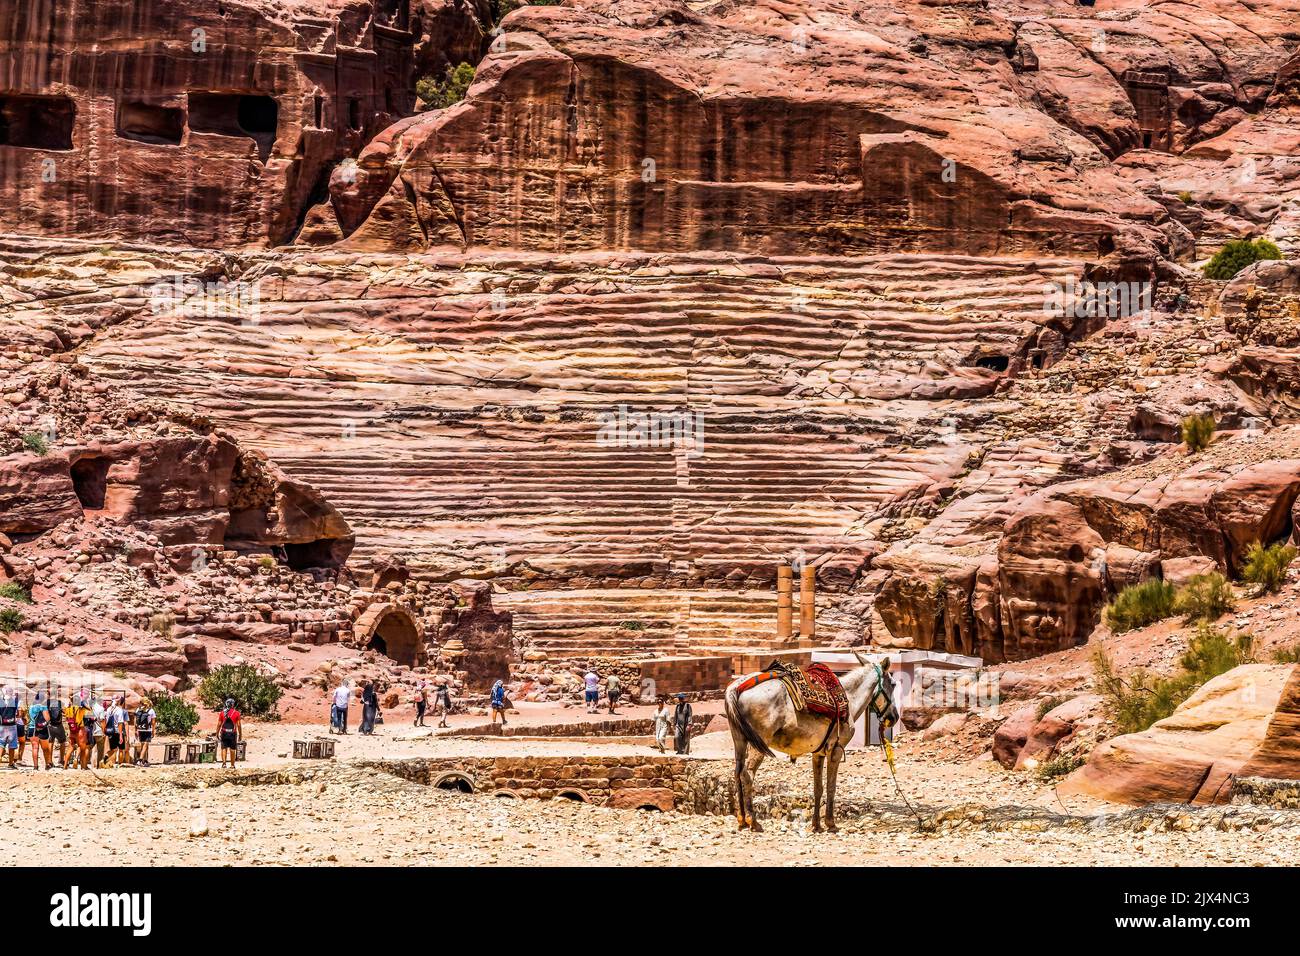 Donkey Tourists Red Carved Amphitheater Morrning Petra Jordan Built by Nabataens in 100 AD Finished by Romans Seats up to 7,000 people. Stock Photo